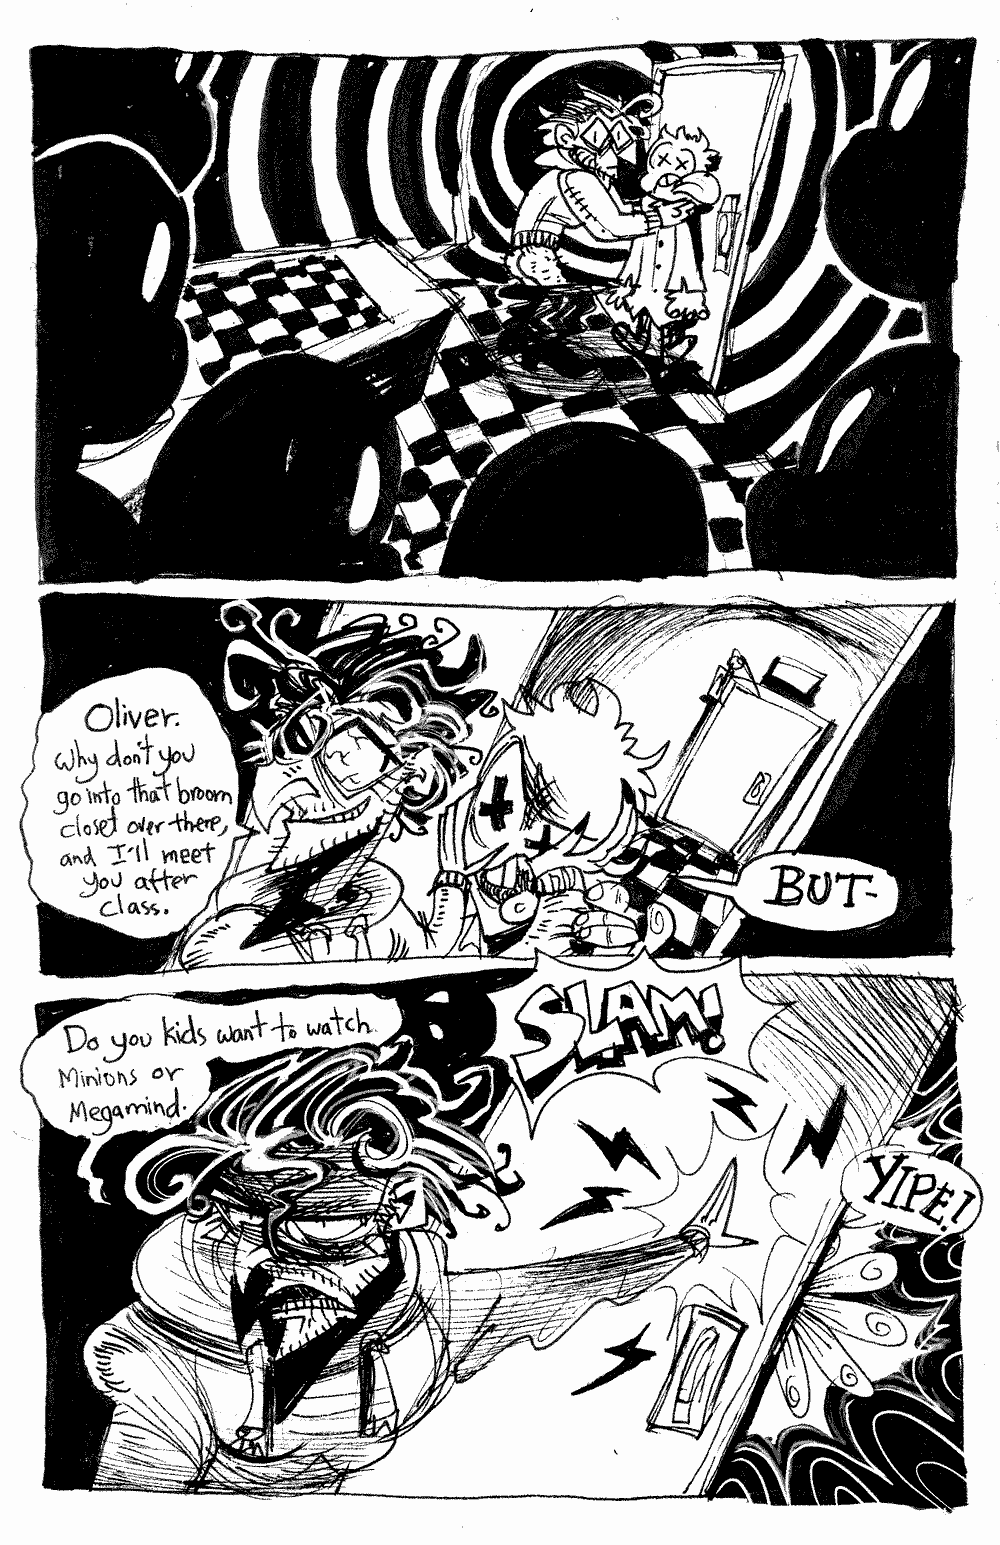 Page 16 - We see the shadows of the students' heads staring directly at Basile throttling Ollie.  Basile's pants have fallen down.  'Oliver.  Why don't you go intio that broom closet over there, and I'll meet you after class.'  Basile pushes Ollie out of the room.  Ollie protests.  'BUT-'.  Basile slams the door shut with a scowl.  'Do you kids want to watch Minons or Megamind.'.  Ollie's fingers are stuck in the door and he YIPES.